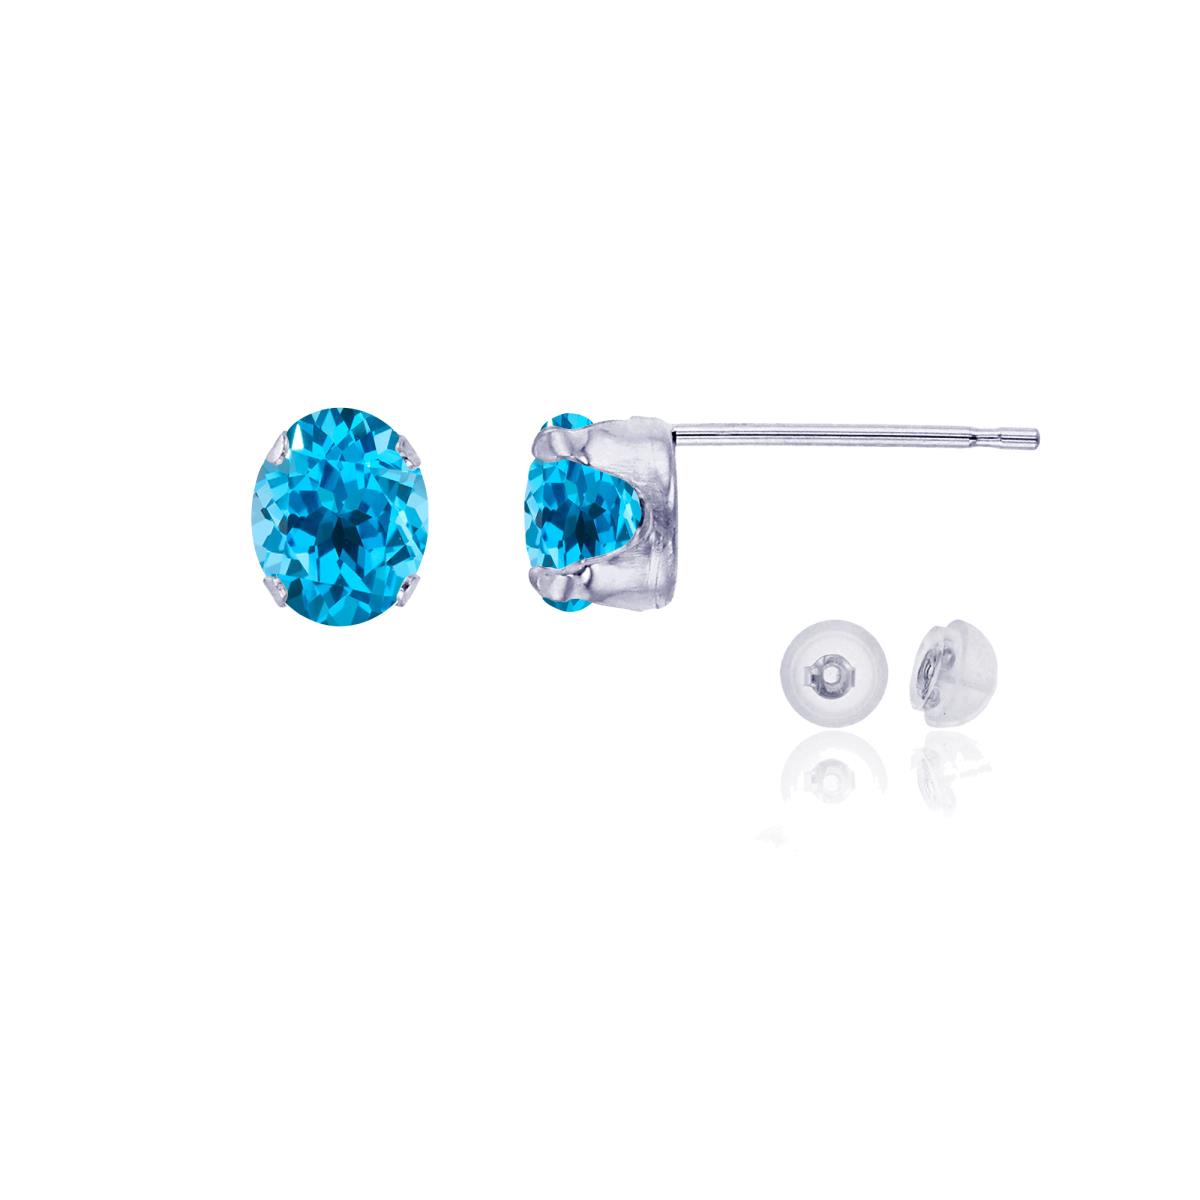 14K White Gold 6x4mm Oval Swiss Blue Topaz Stud Earring with Silicone Back